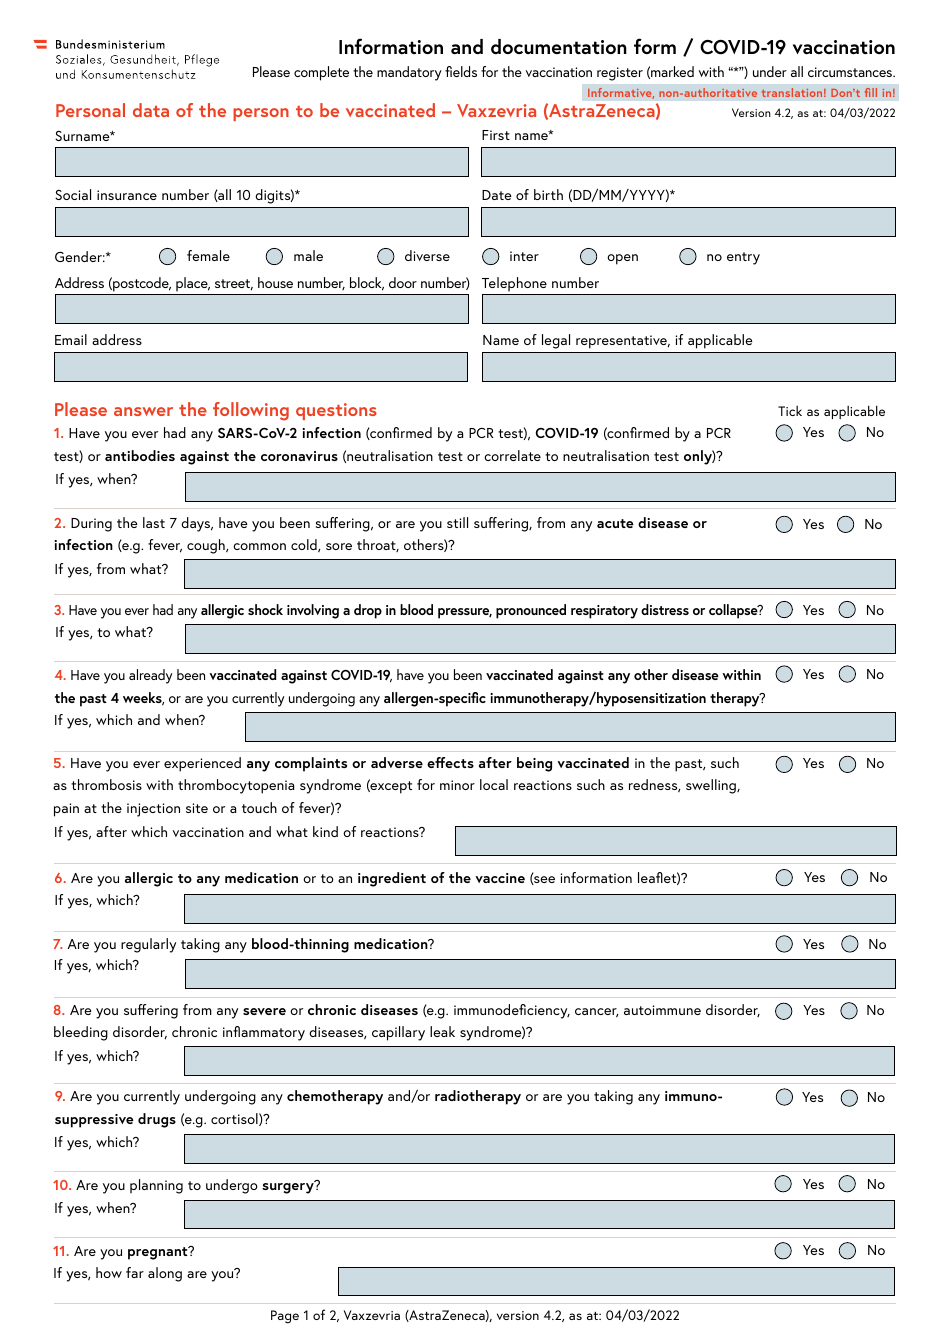 Information and Documentation Form / Covid-19 Vaccination - Austria, Page 1